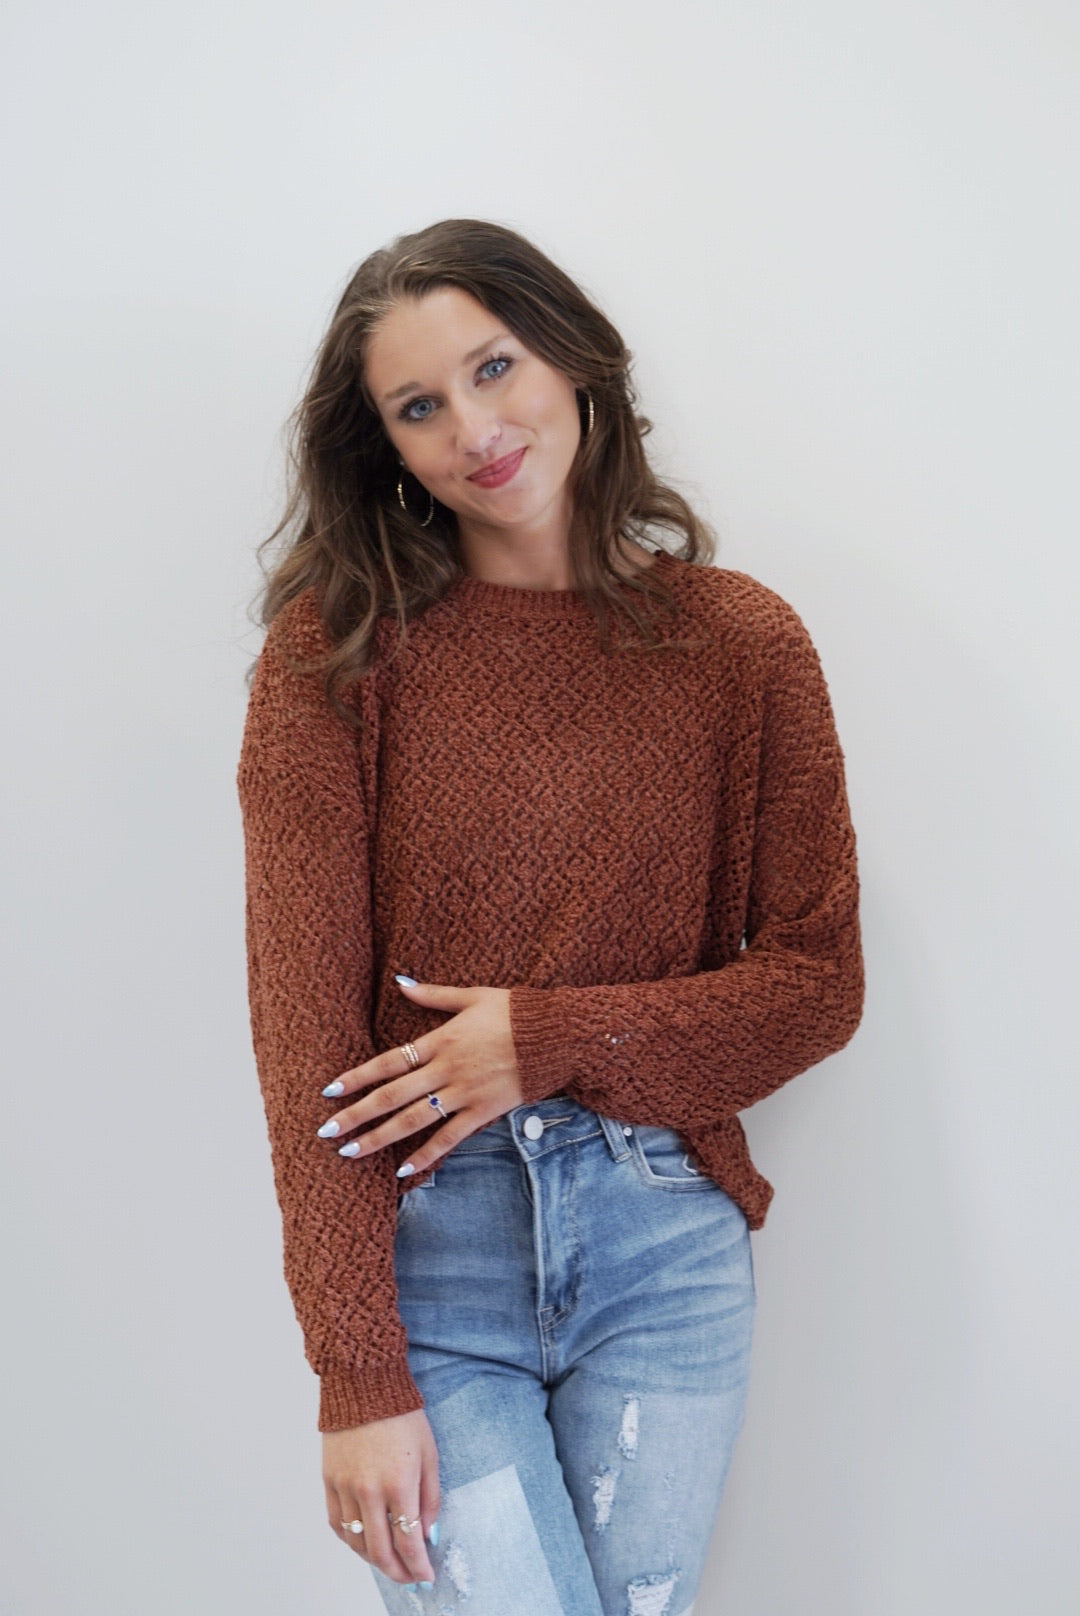 Camille Cable Knit Chenille Sweater Round Neckline Long Cuffed Sleeve Knit Chenille Pattern  Marsala Color Relaxed Fit 100% Polyester Care: Hand Wash Cold, Do Not Bleach, Hang to Dry